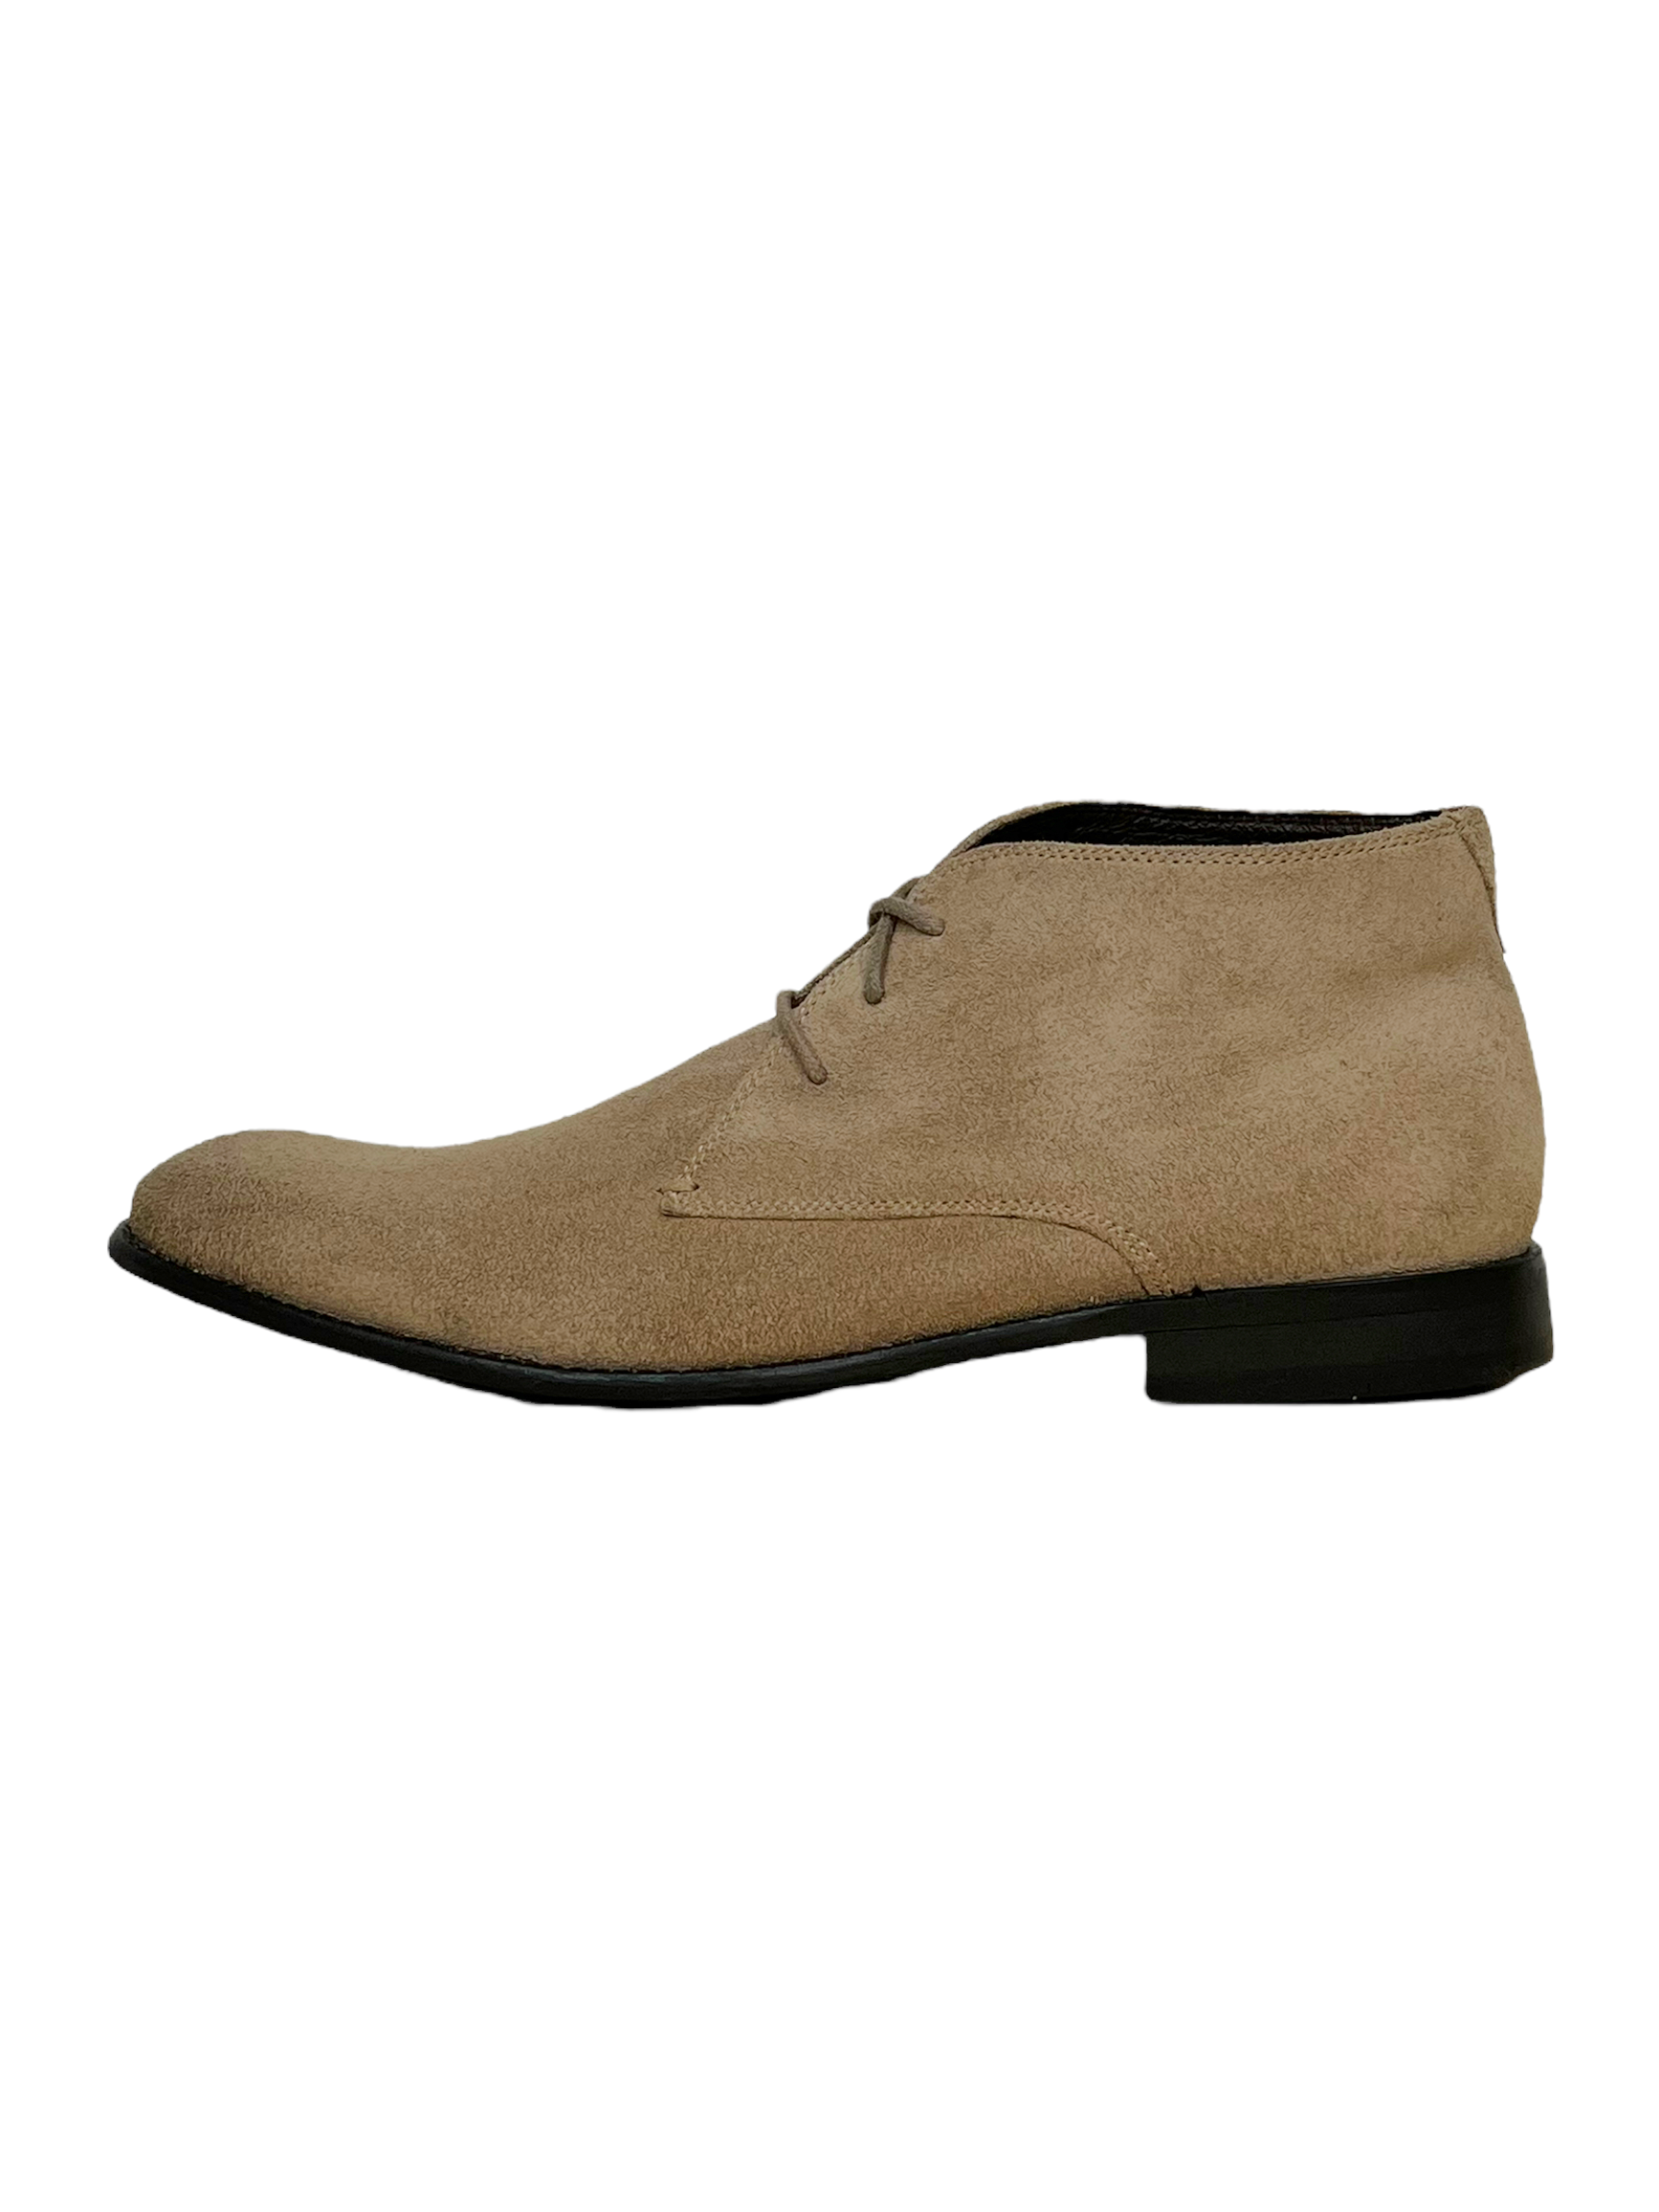 John Varvatos Beige Suede Ankle Chelsea Boots - Genuine Design Luxury Consignment for Men. New & Pre-Owned Clothing, Shoes, & Accessories. Calgary, Canada